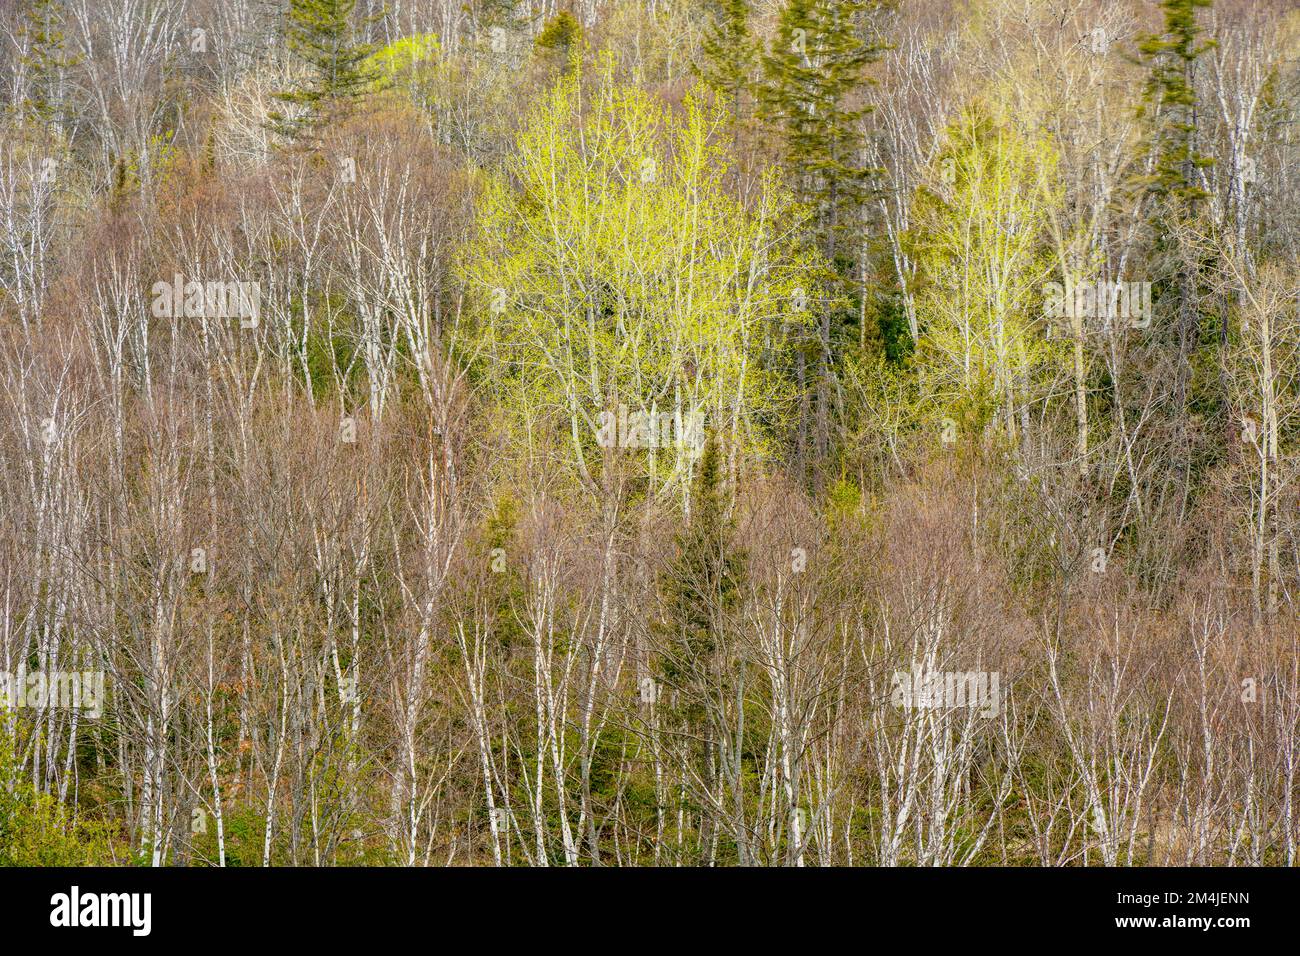 Early spring foliage appearing in a lone aspen tree, Greater Sudbury, Ontario, Canada Stock Photo